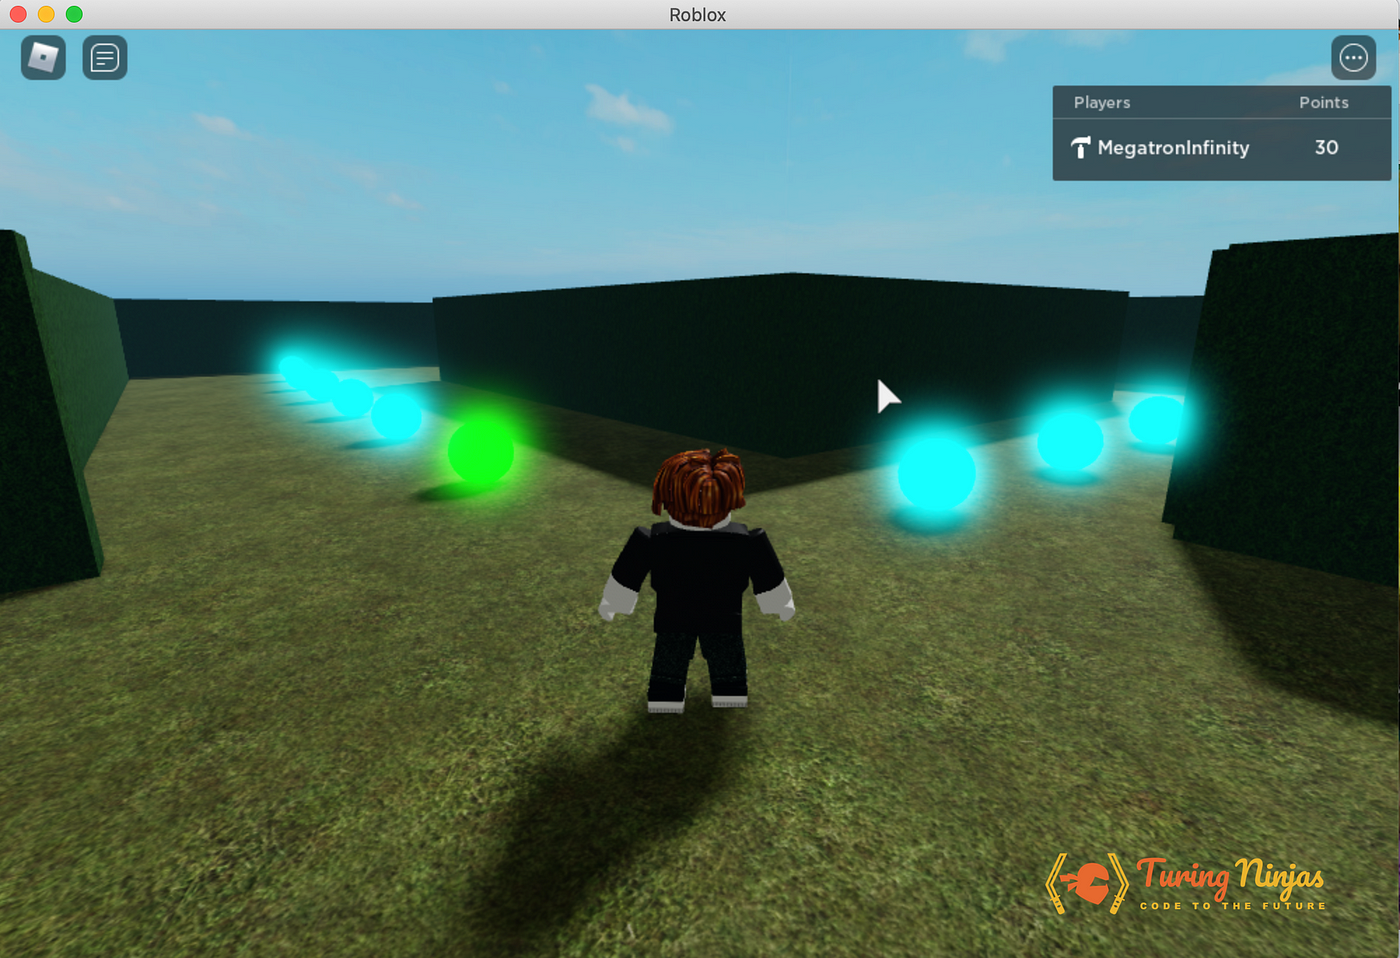 Game Design in Roblox - free self-paced course for kids Tickets, Multiple  Dates